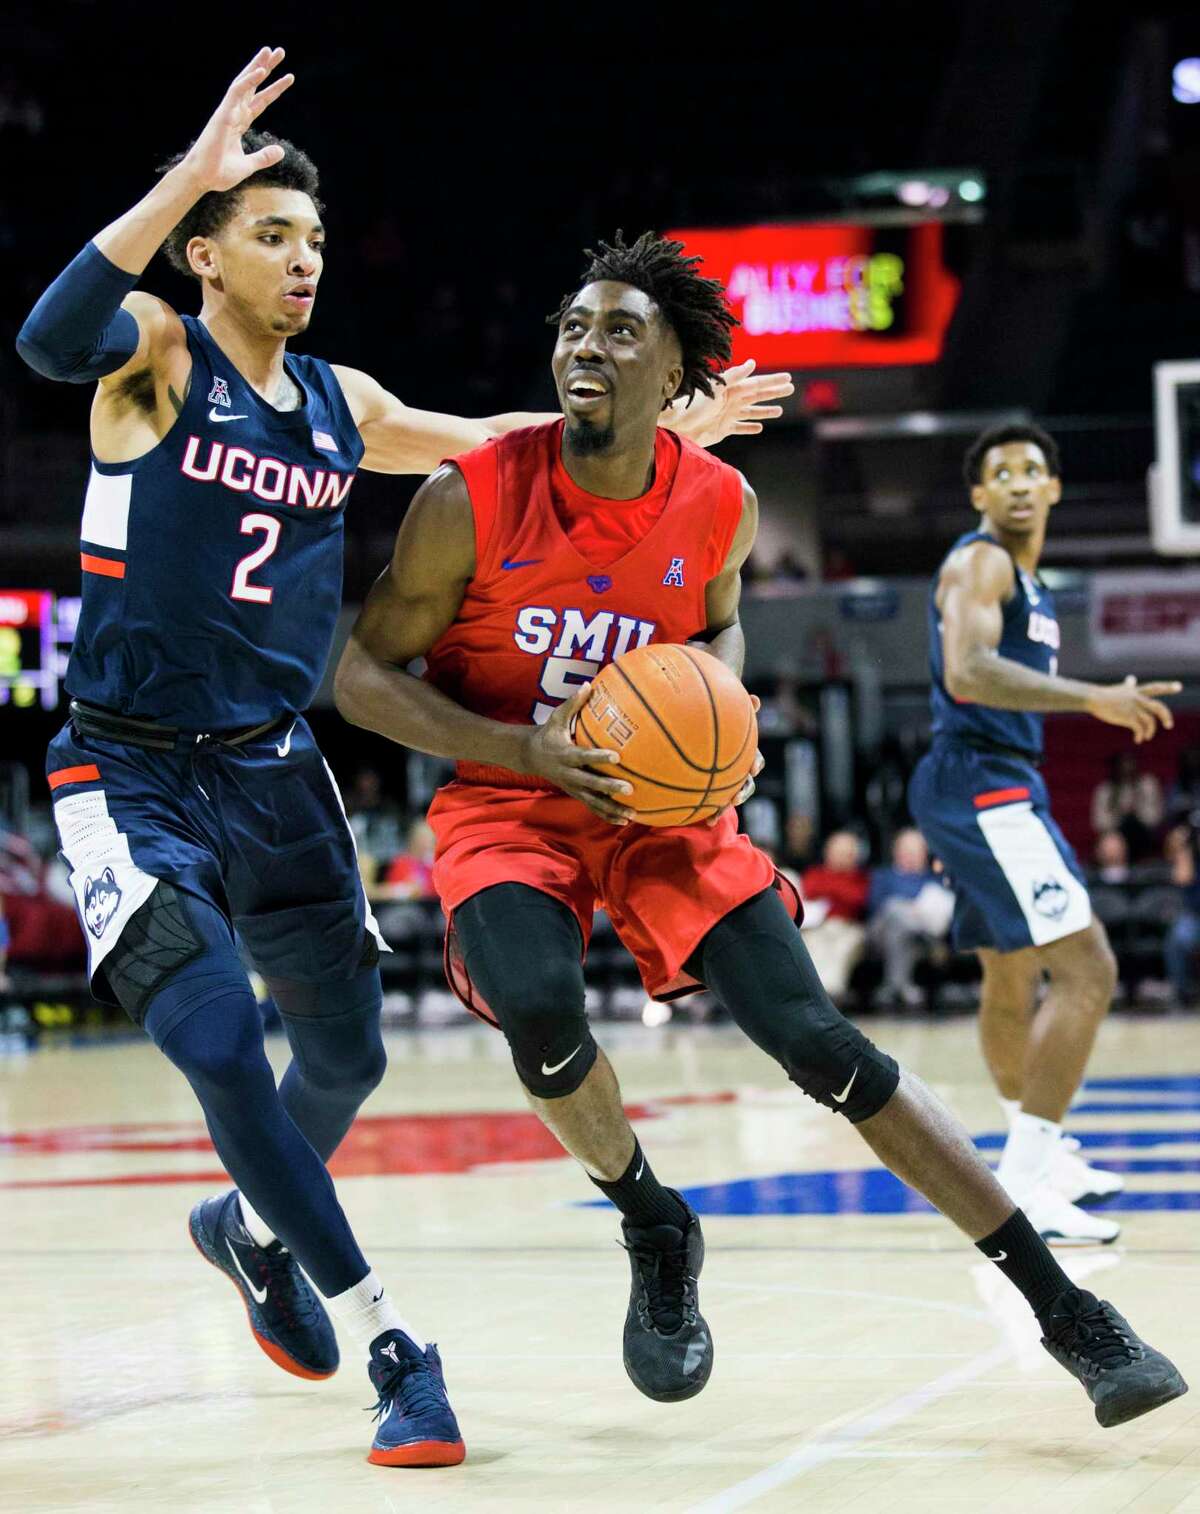 SMU guard Emmanuel Bandoumel (5) looks for a shot around UConn’s James Bouknight (2) during the first half Wednesday in Dallas.